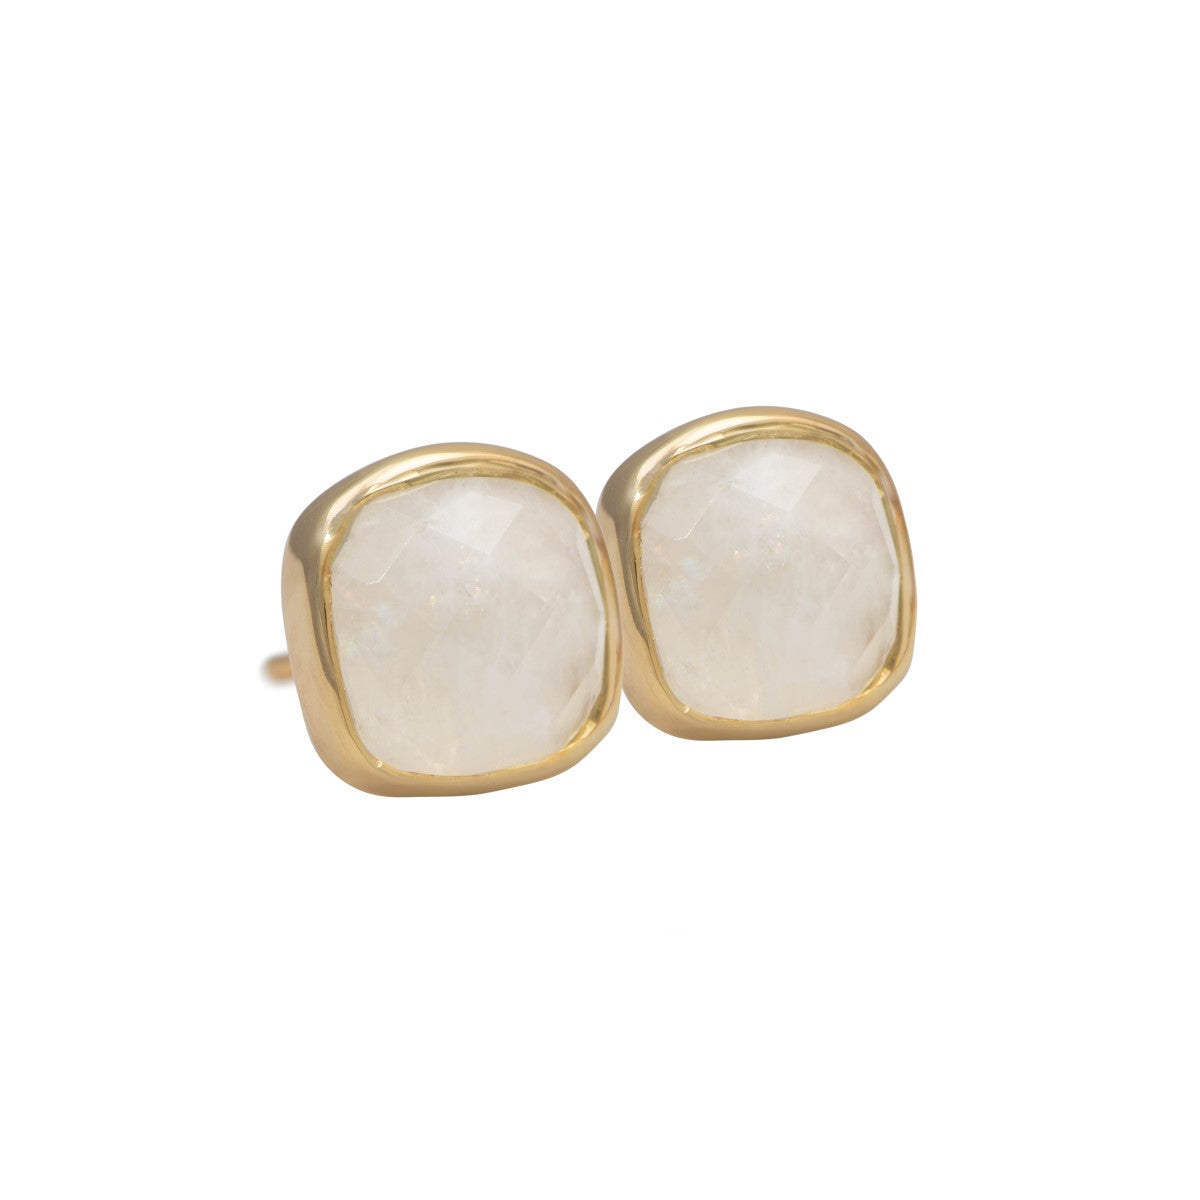 Faceted Square Moonstone Gemstone Stud Earrings in Gold Plated Sterling Silver